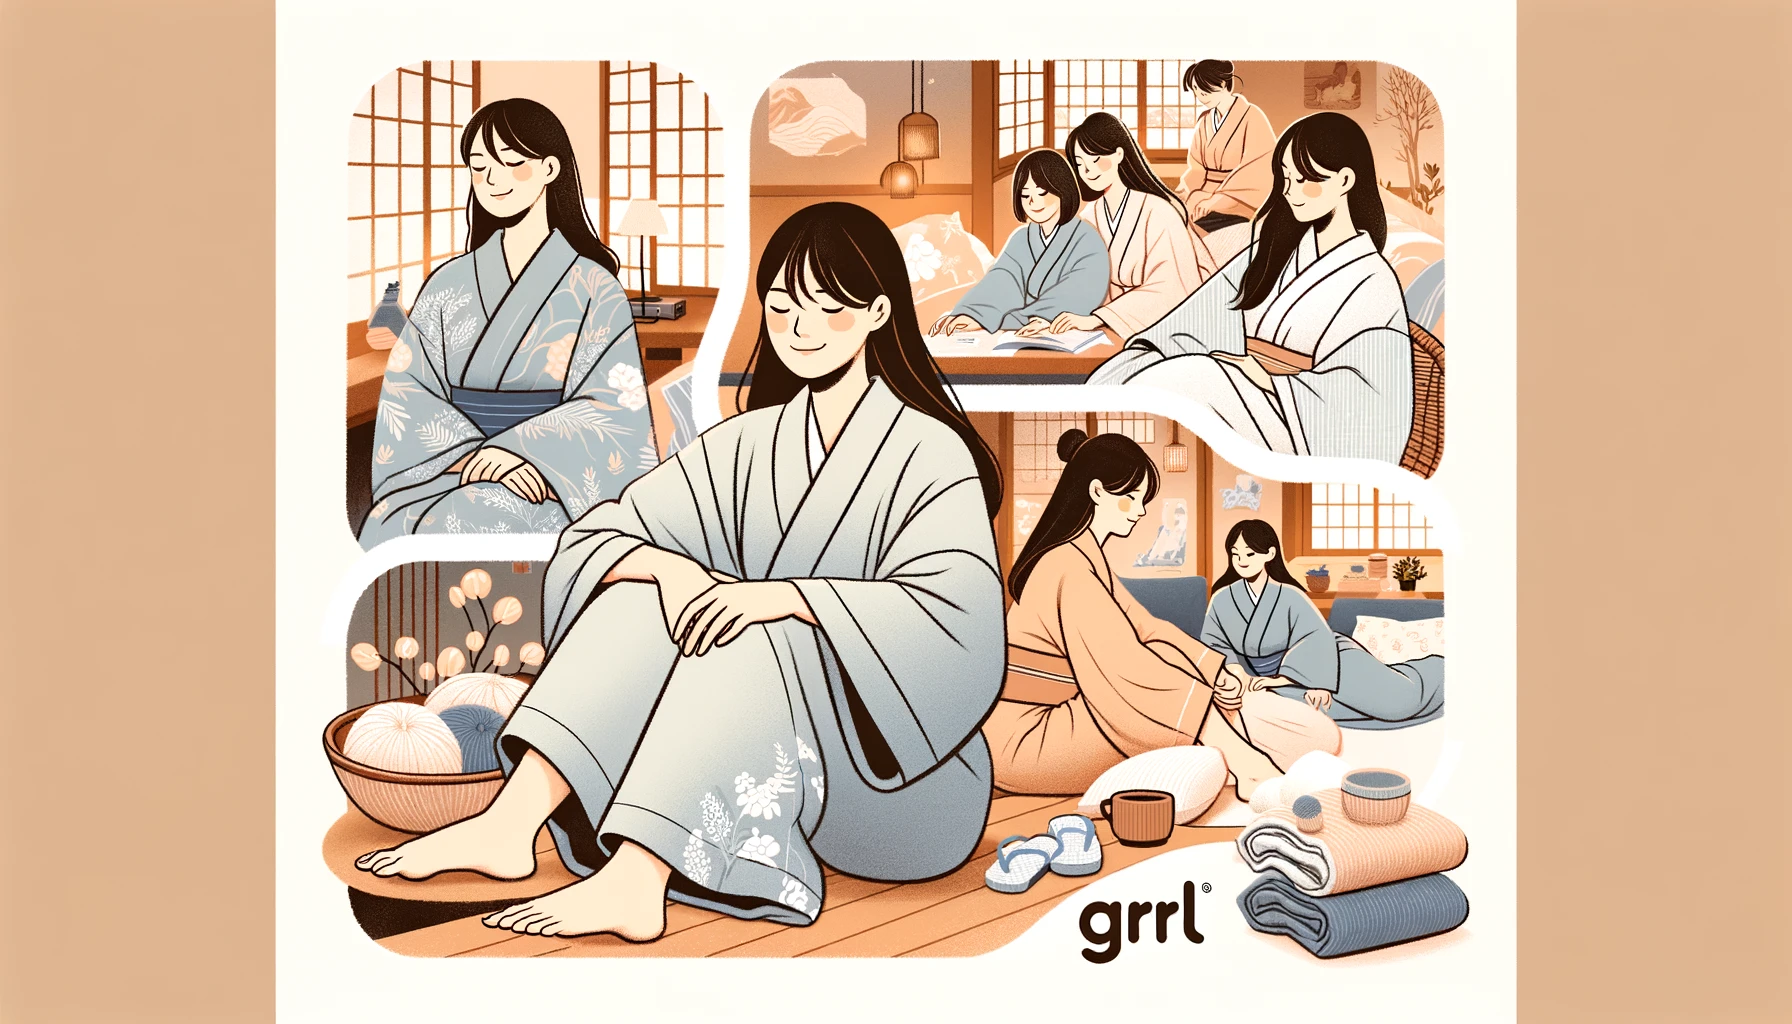 An image illustrating the comfort of wearing GRL yukatas. The image features models relaxing and enjoying themselves while wearing GRL yukatas, highlighting the soft and comfortable fabric. The background includes cozy and serene settings, with 'GRL' prominently displayed.